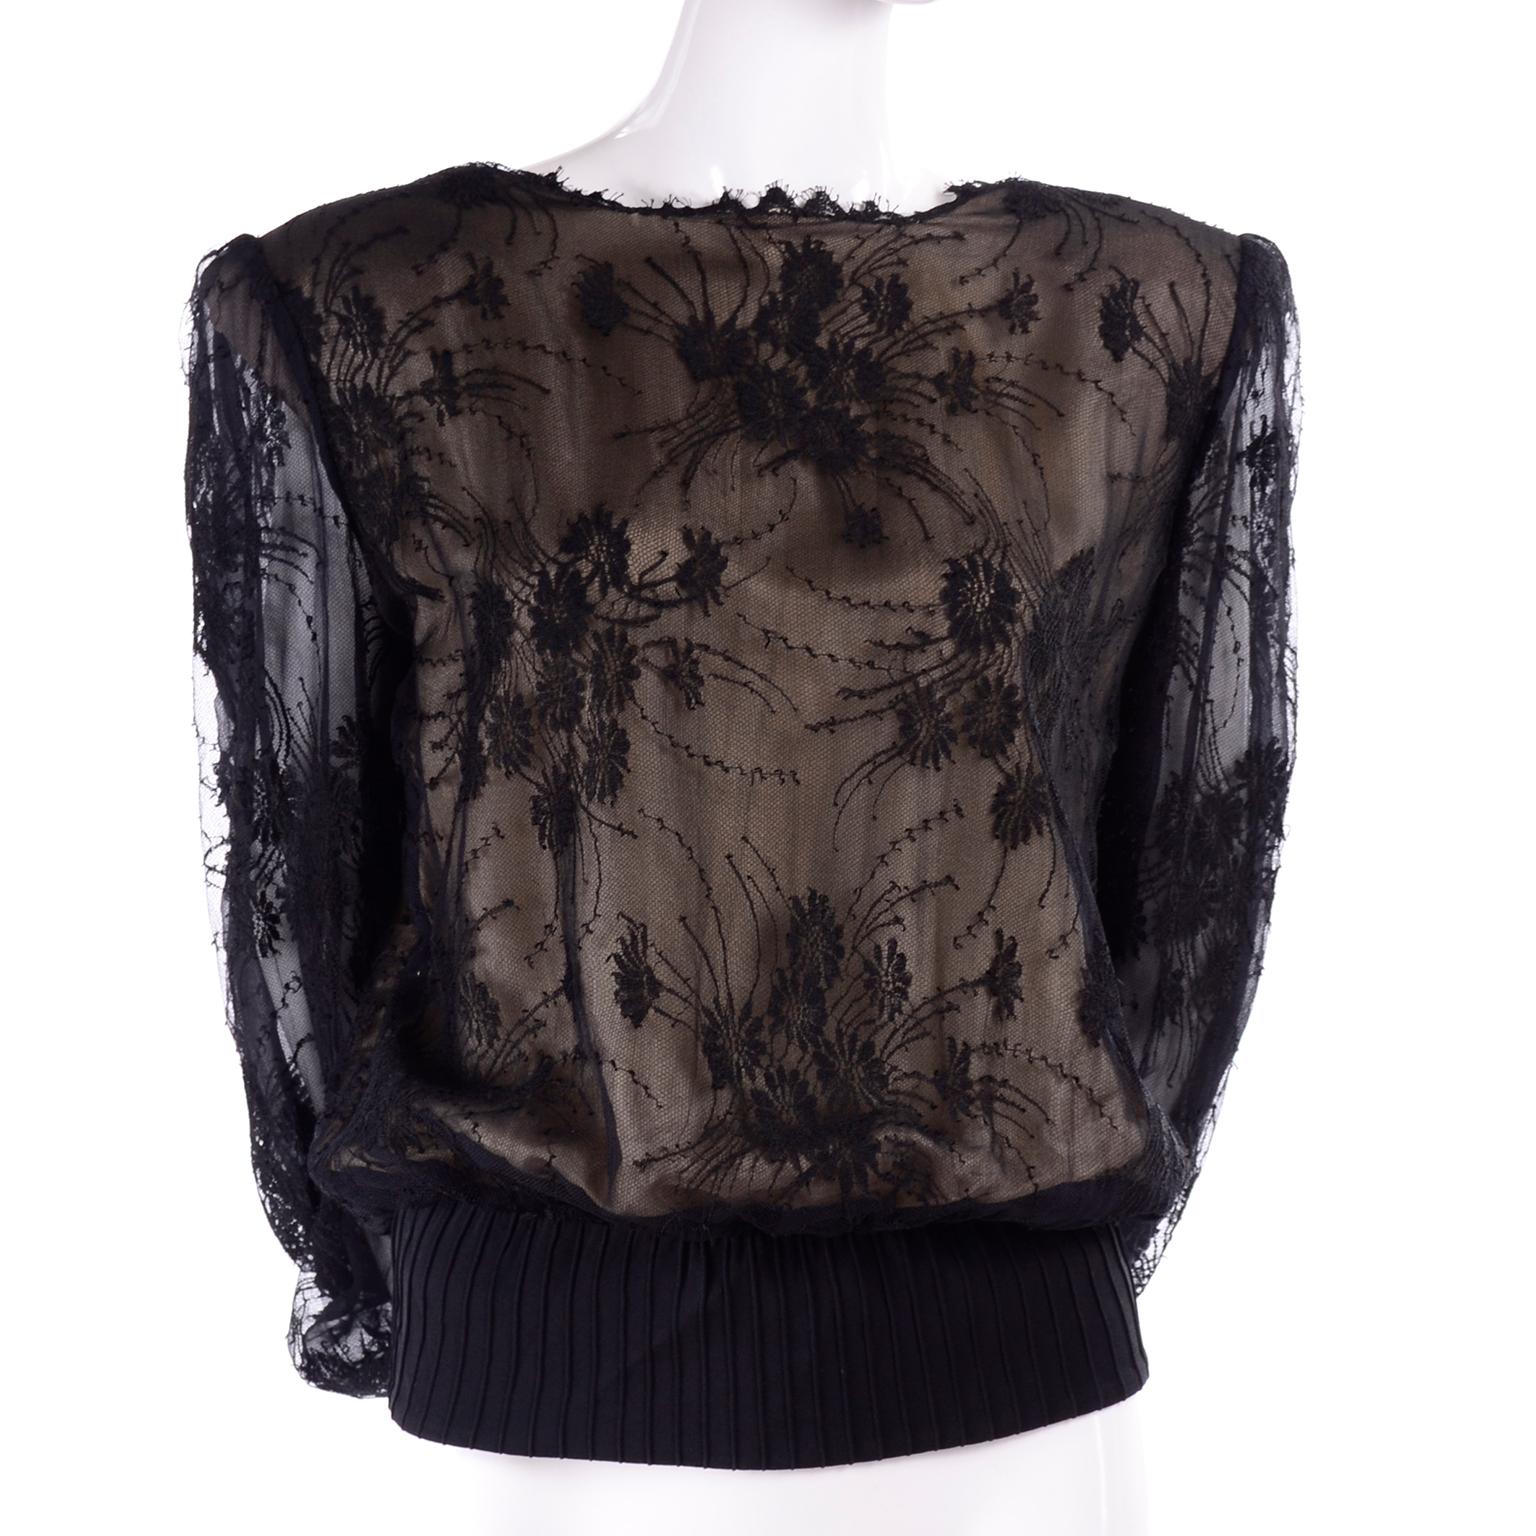 This is an incredible Valentino boutique vintage top with black lace overlay on a nude silk. The blouse almost has the fit of a sweatshirt so it is very comfortable but so elegant! 
 The sleeves have two layers of lace, and are sheer. It has eyelash